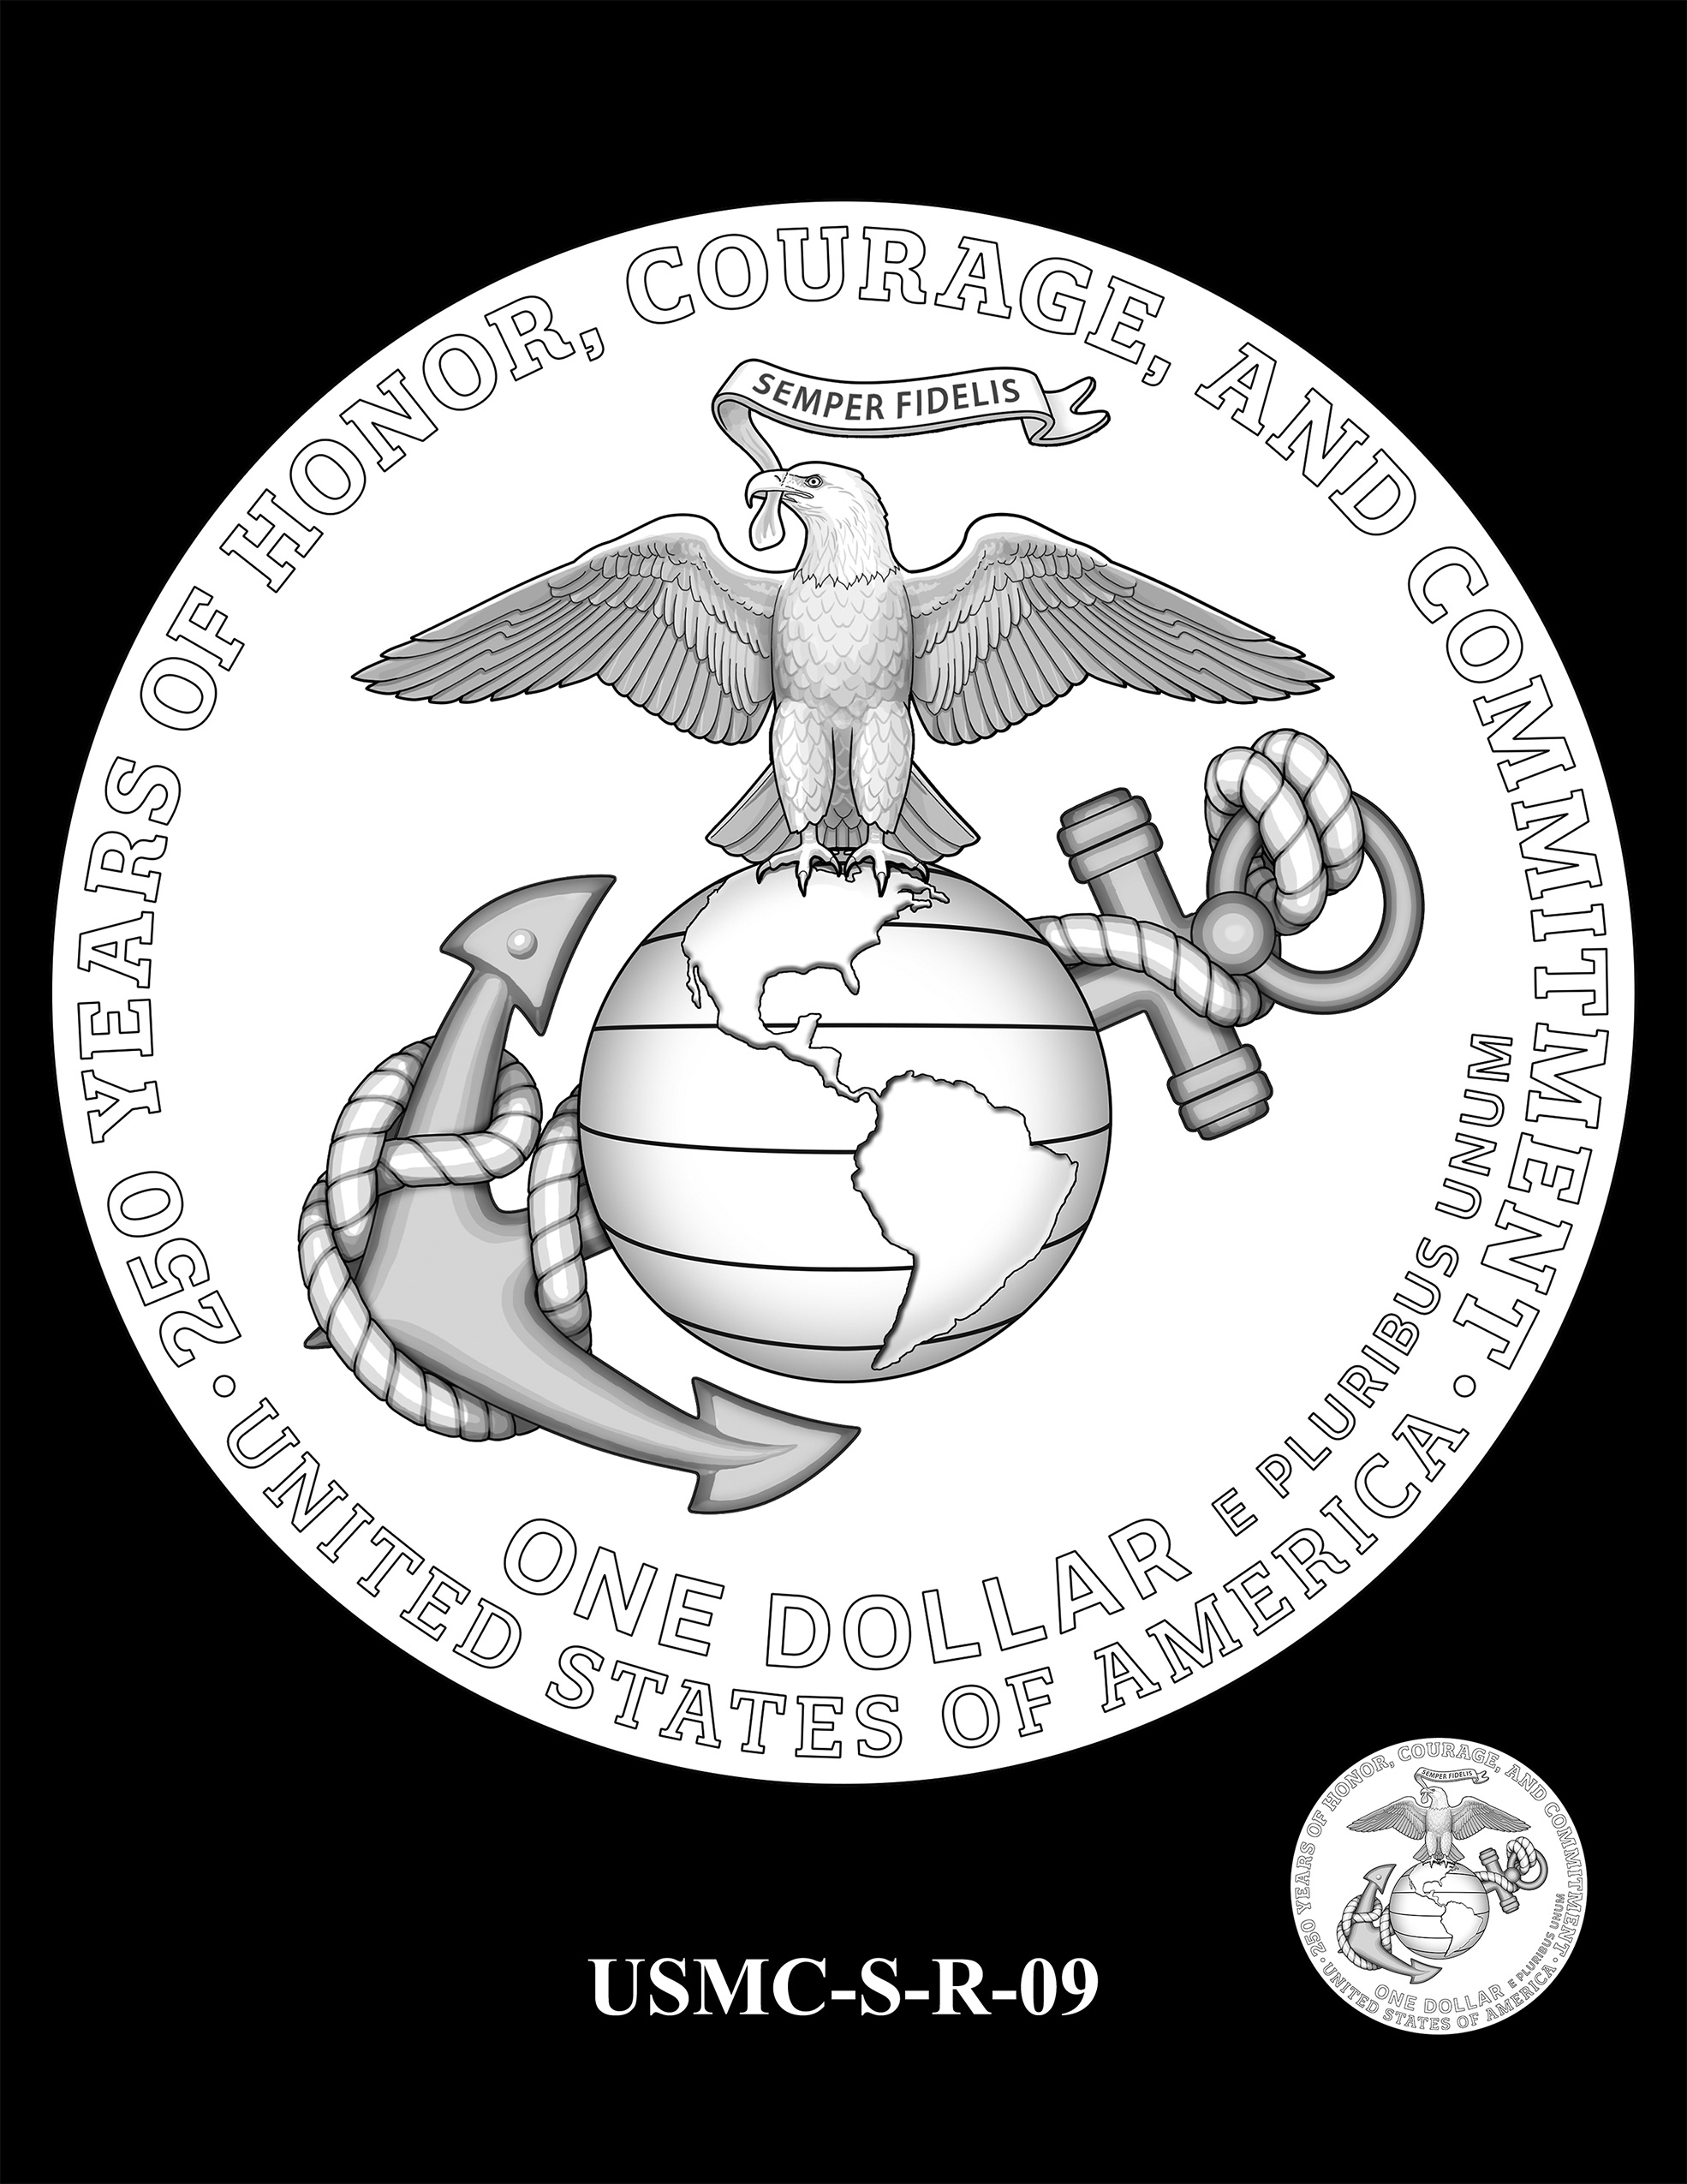 USMC-S-R-09 -- 250th Anniversary of the United States Marine Corps - Silver